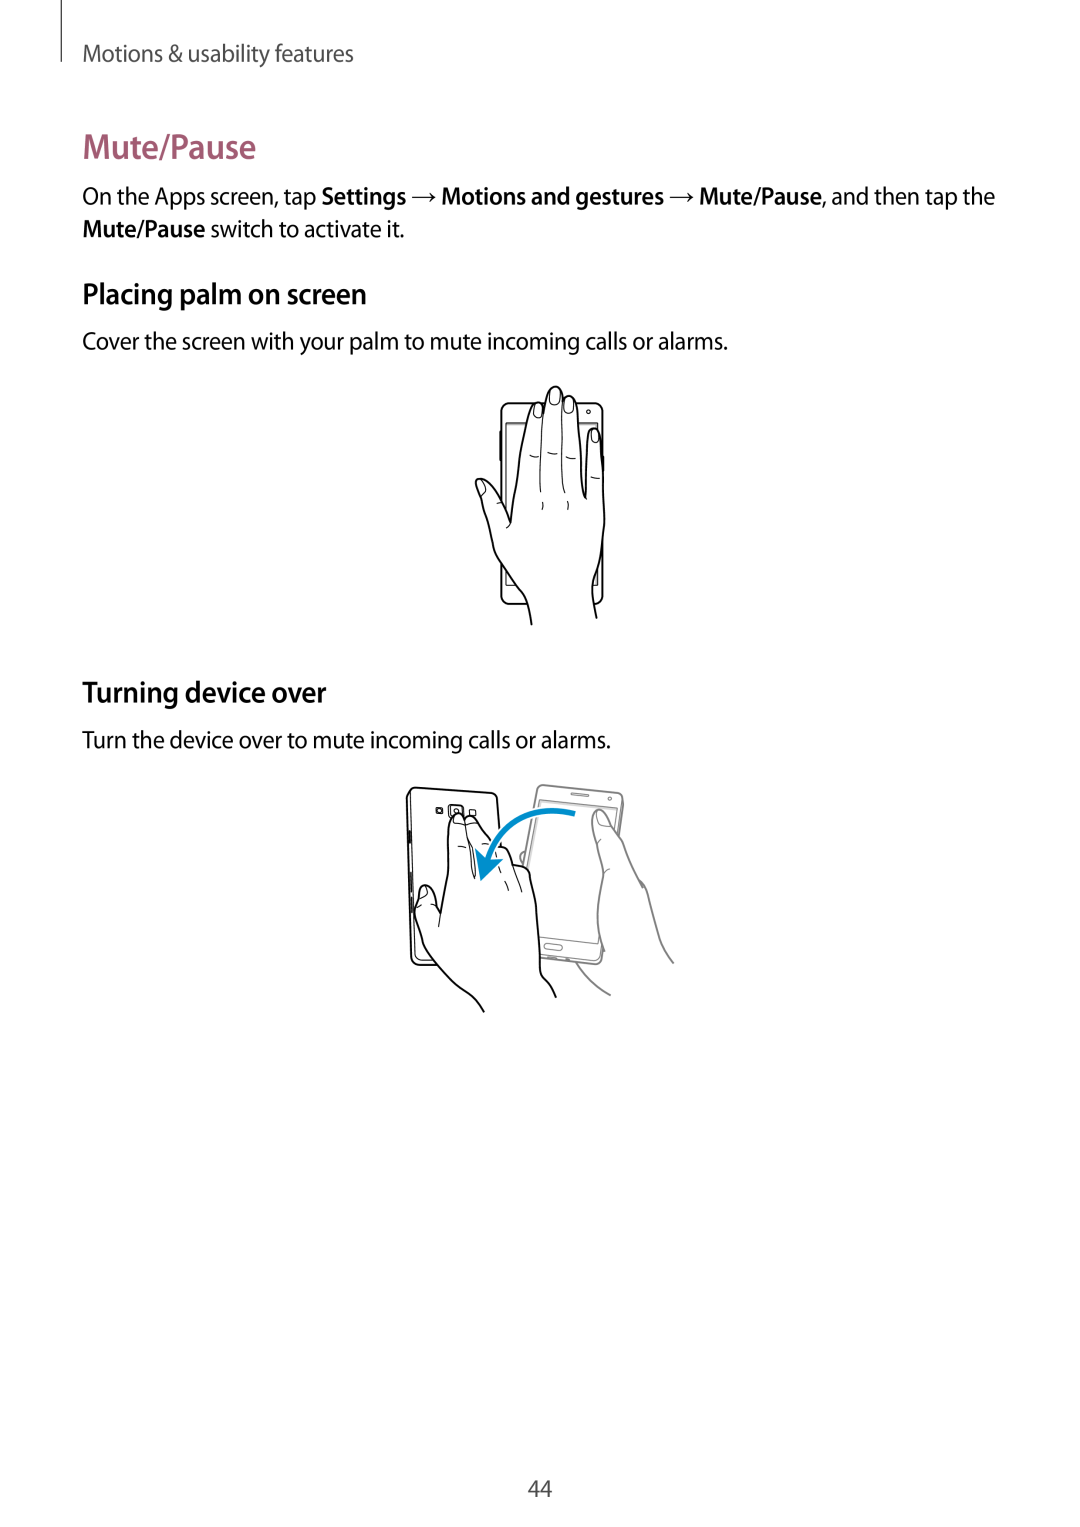 Samsung SM-A700FZDASEB manual Mute/Pause, Placing palm on screen, Turning device over, Motions & usability features 